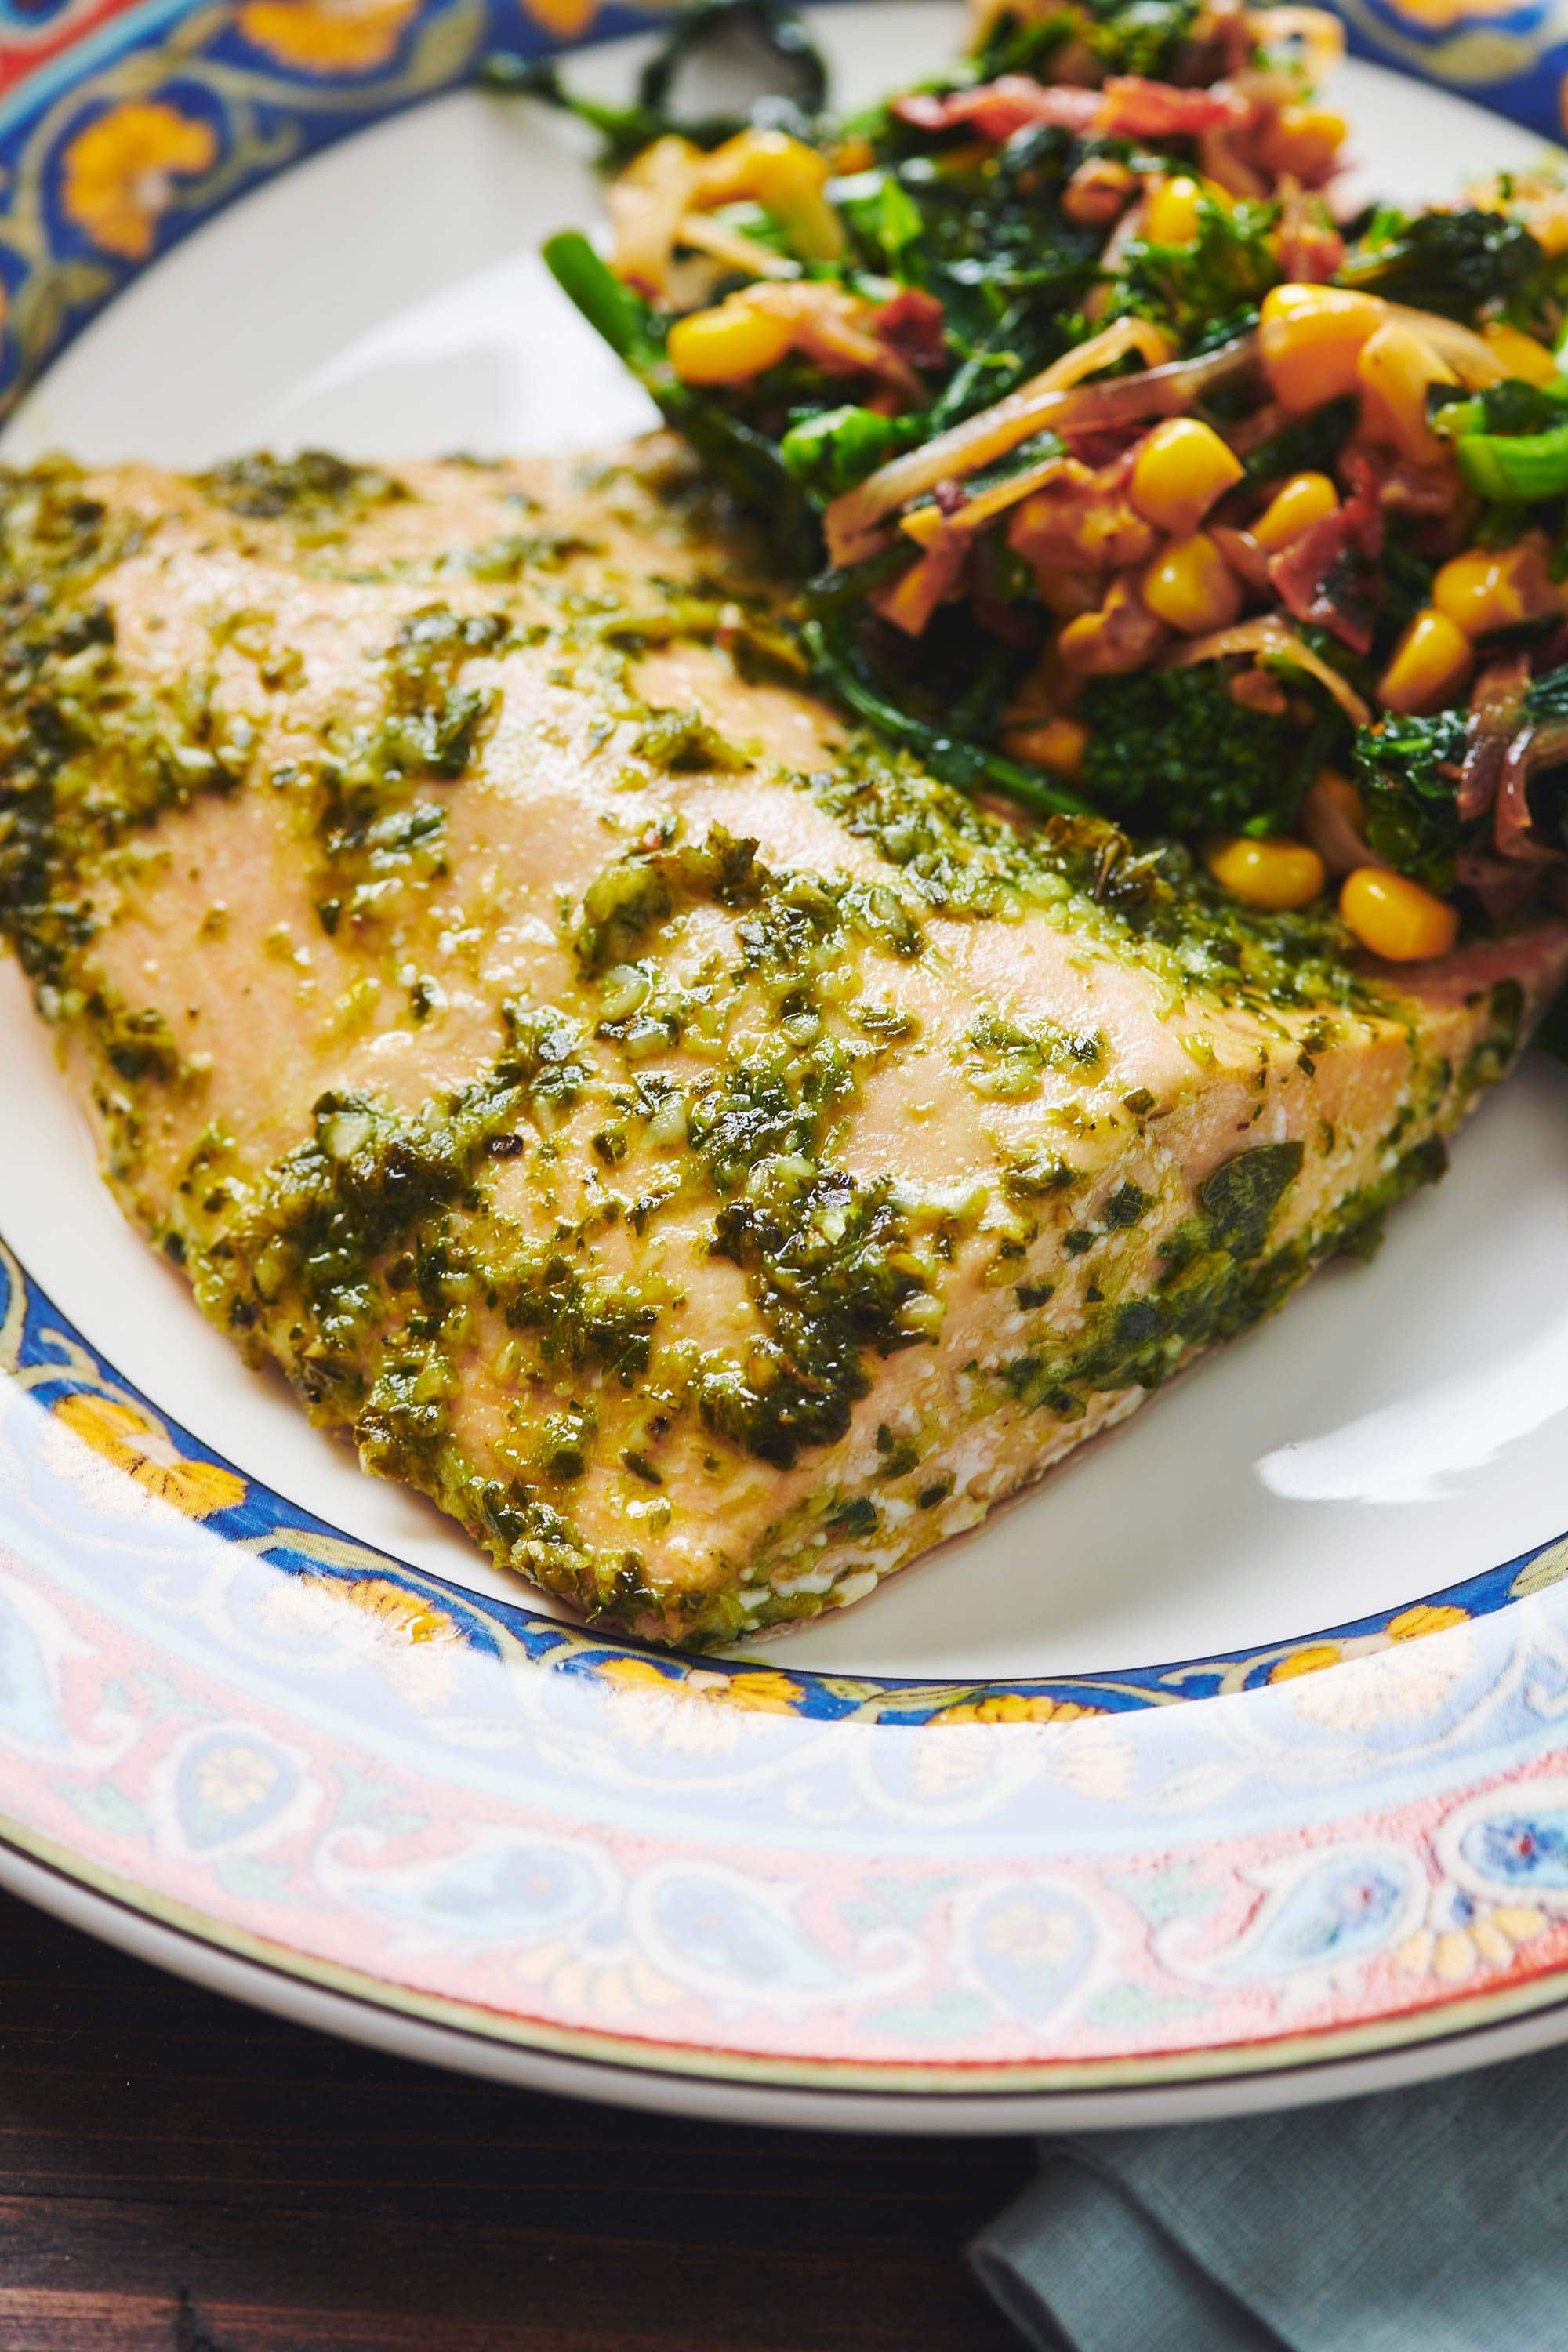 Salmon with Chimichurri Sauce on a plate.